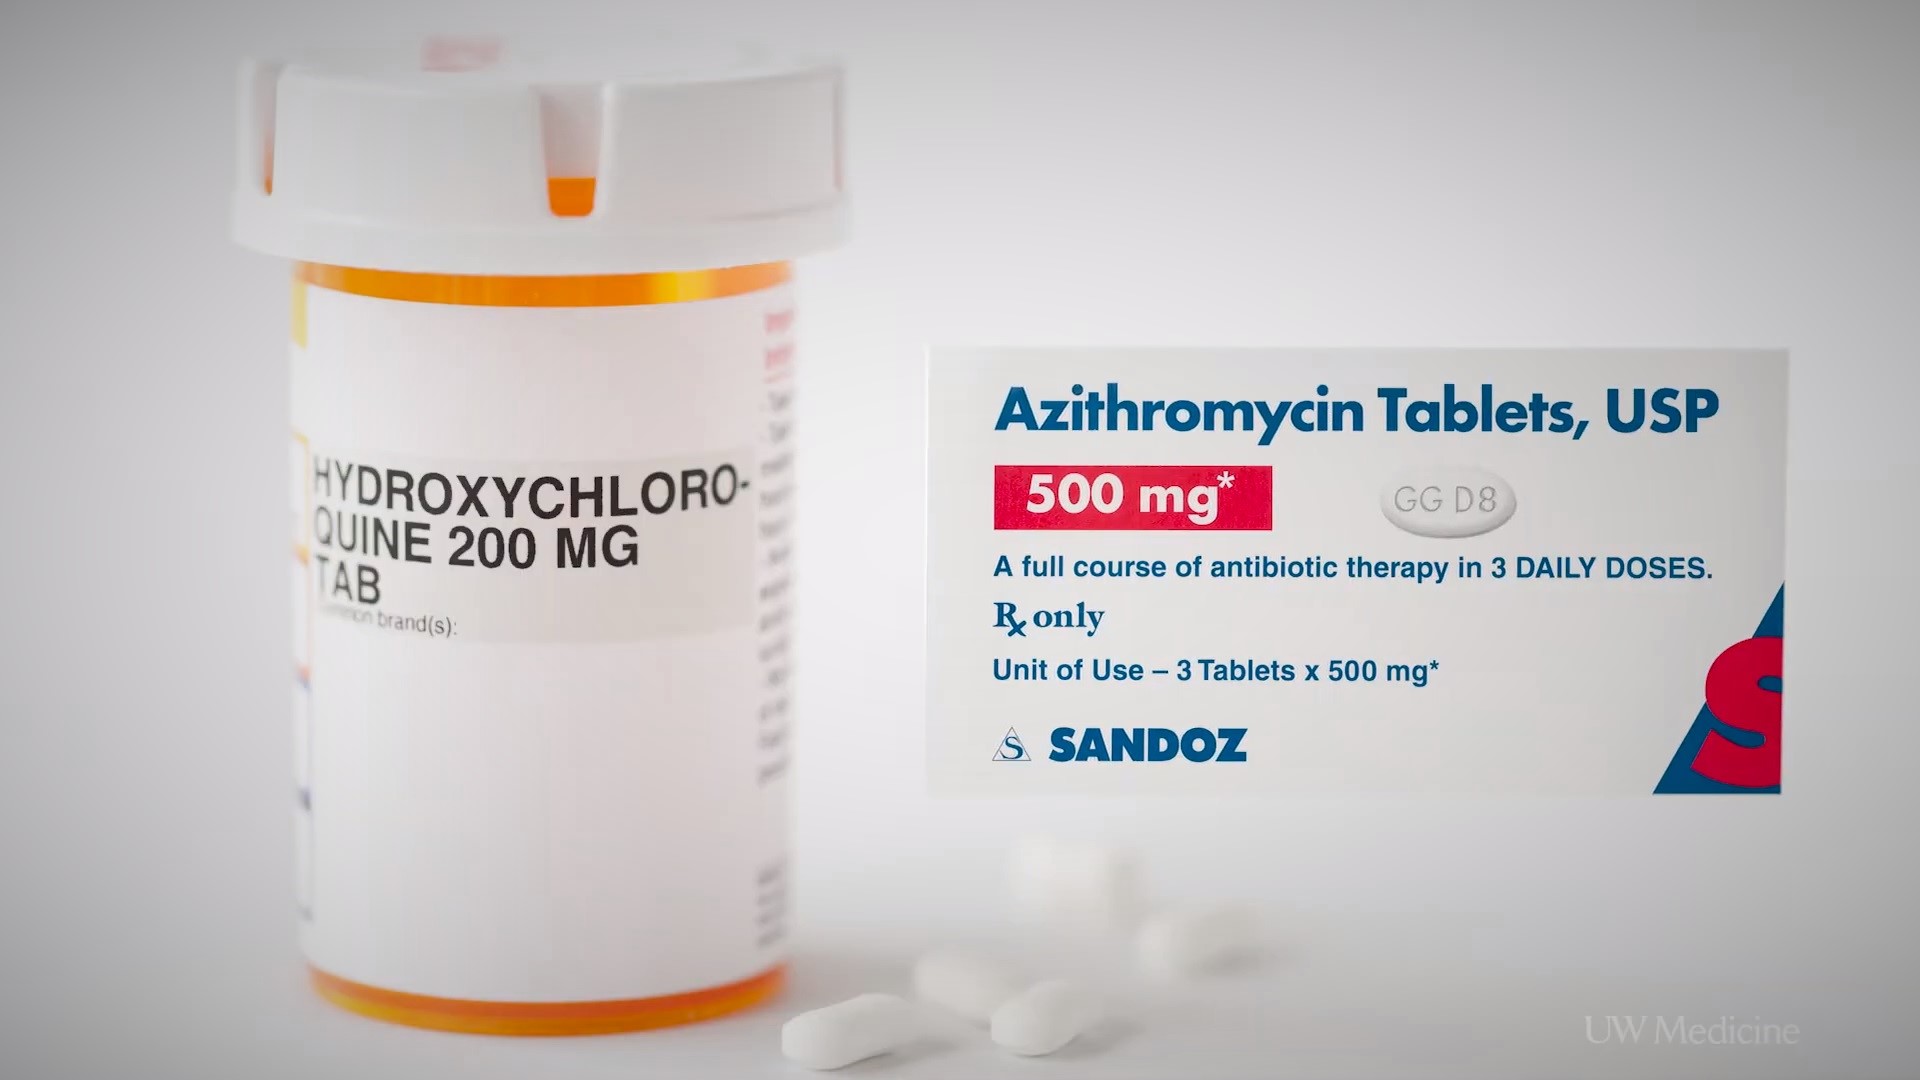 The History and Development of Azithromycin as an Antibiotic